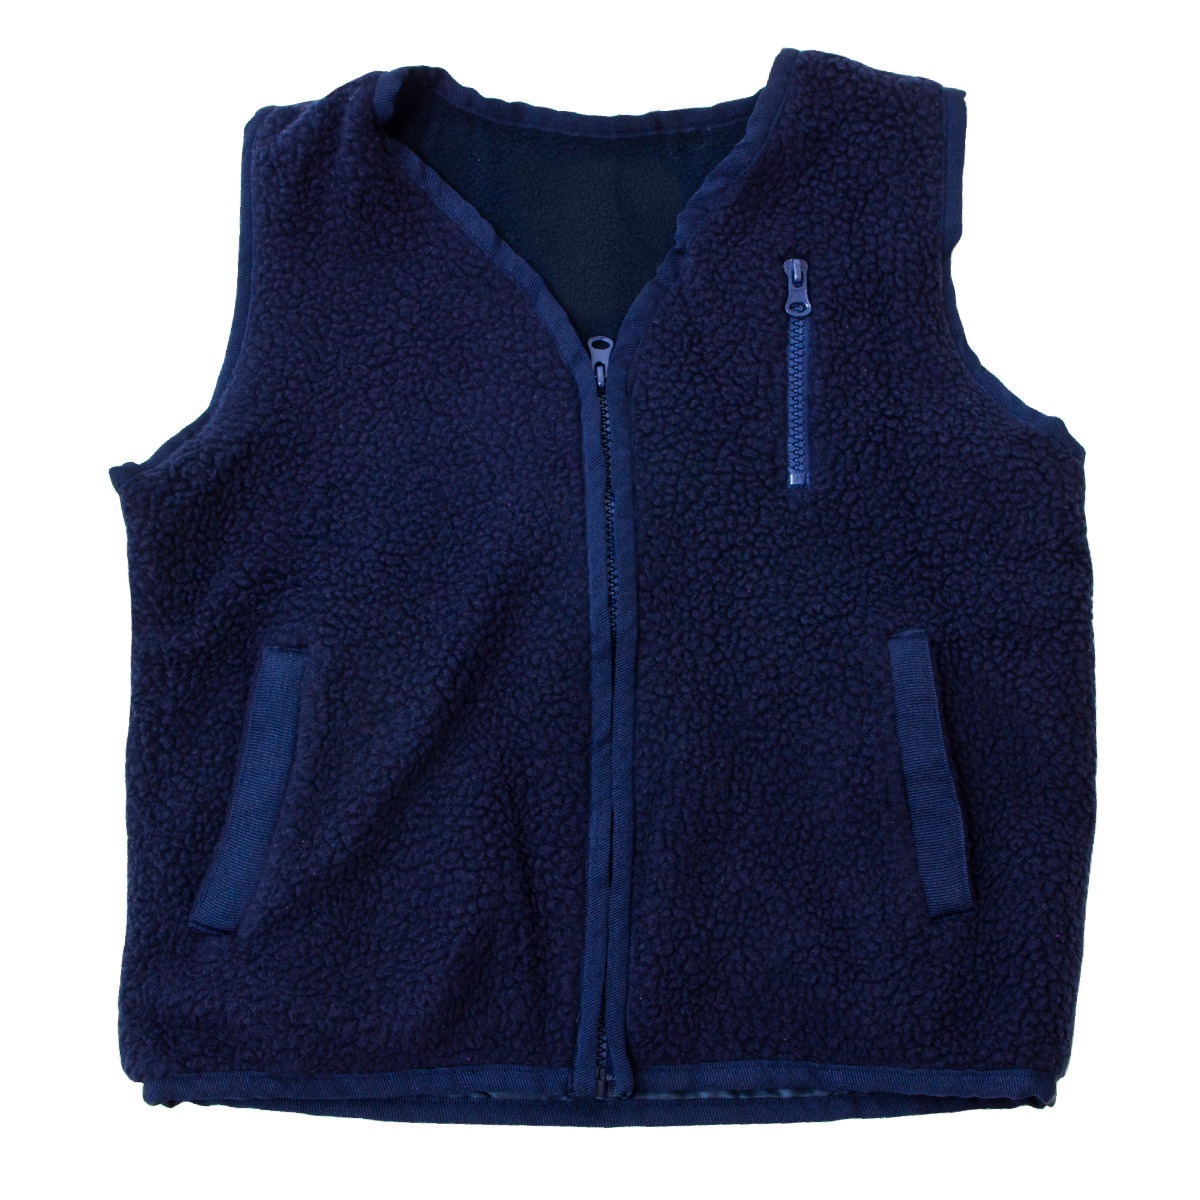 Weighted Compression Vest | Fun & Function